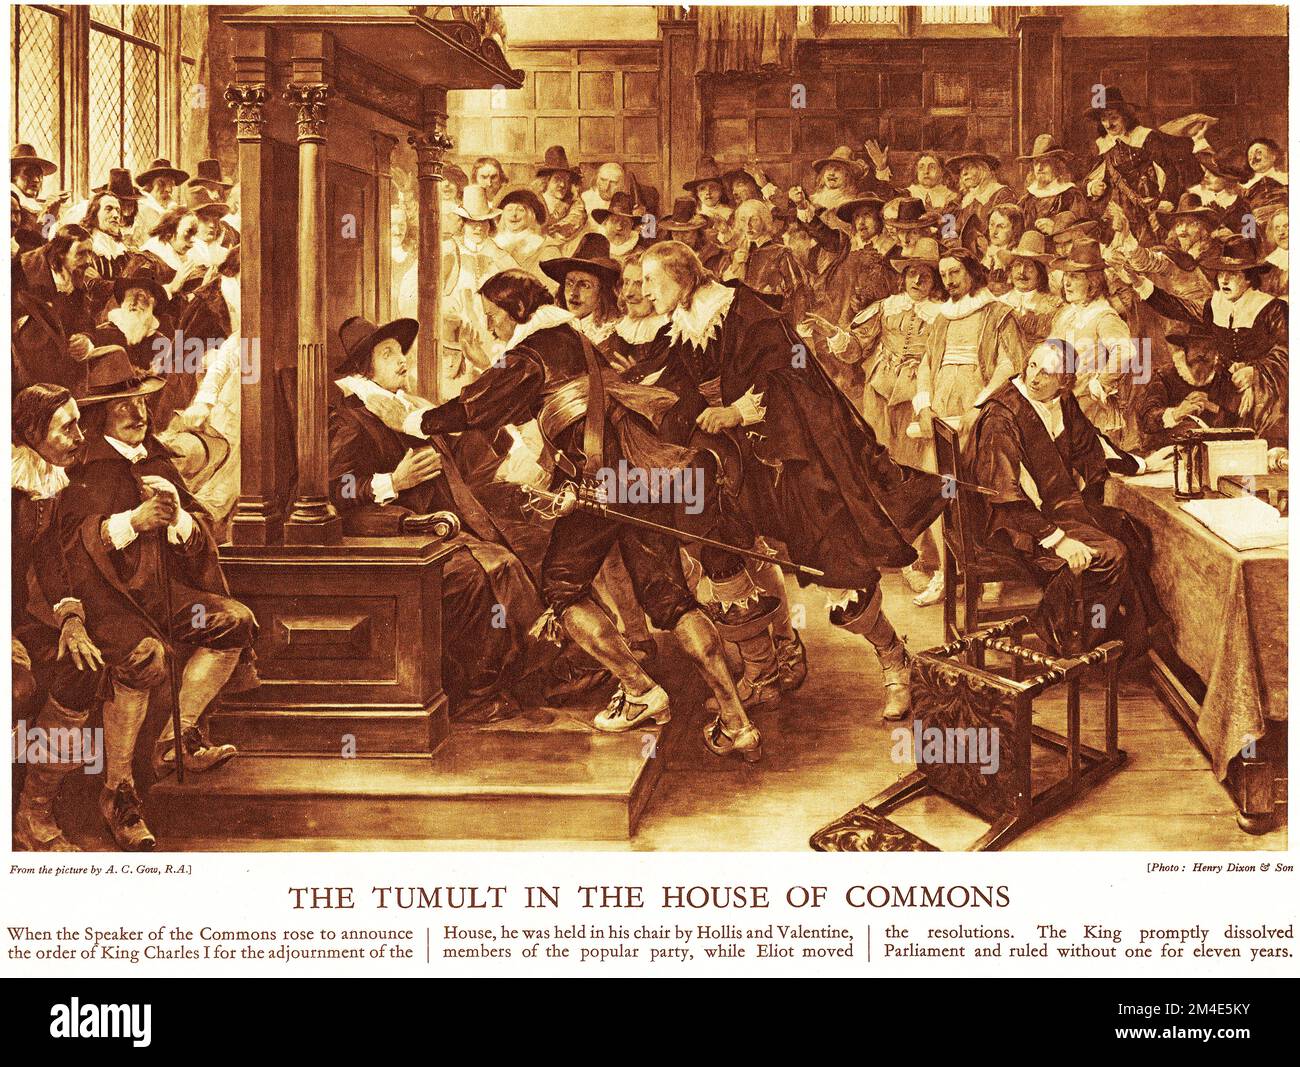 Halftone of a tumult in the House of Commons in the days of Charles I, from an educational publication in 1927. These events led to the Civil War which ended in Charles being tried, condemned, and executed. Stock Photo